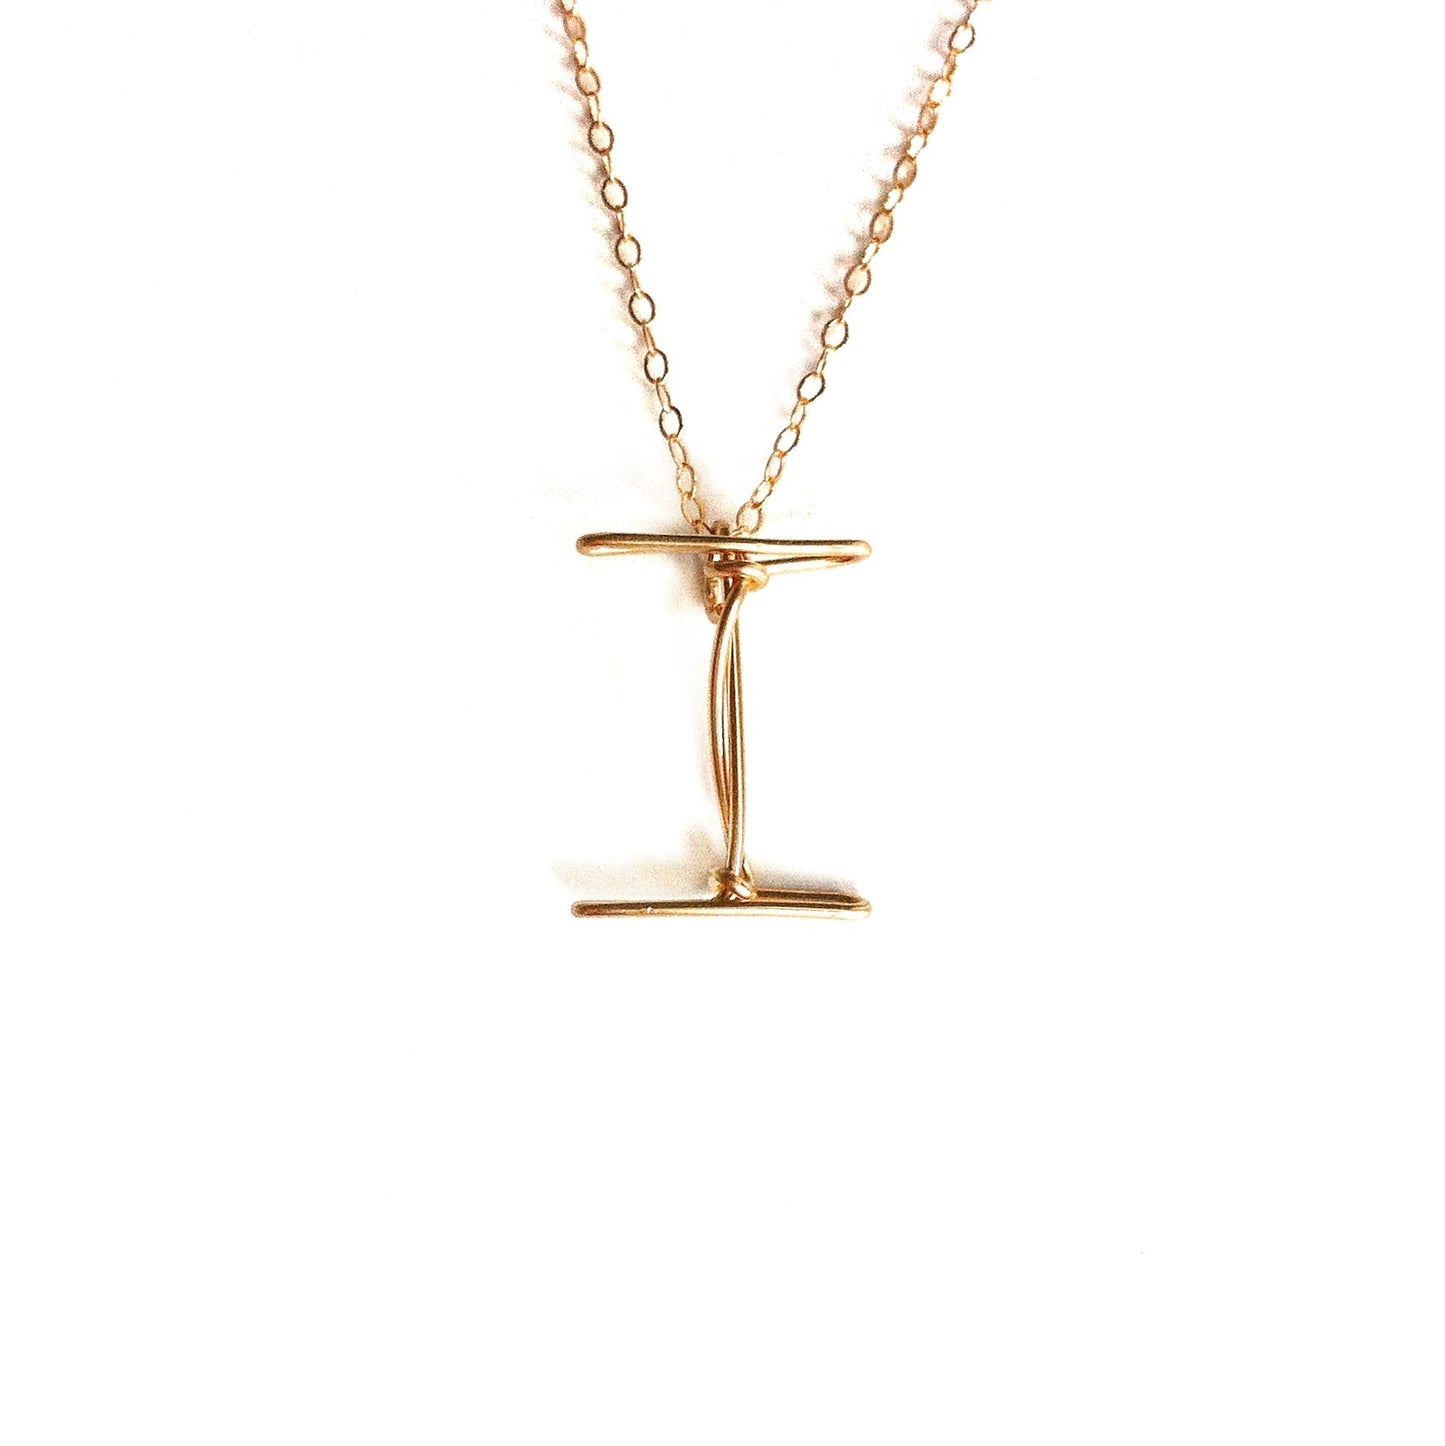 Handmade Initial Necklace Robyn Canady I 14K Gold Filled 